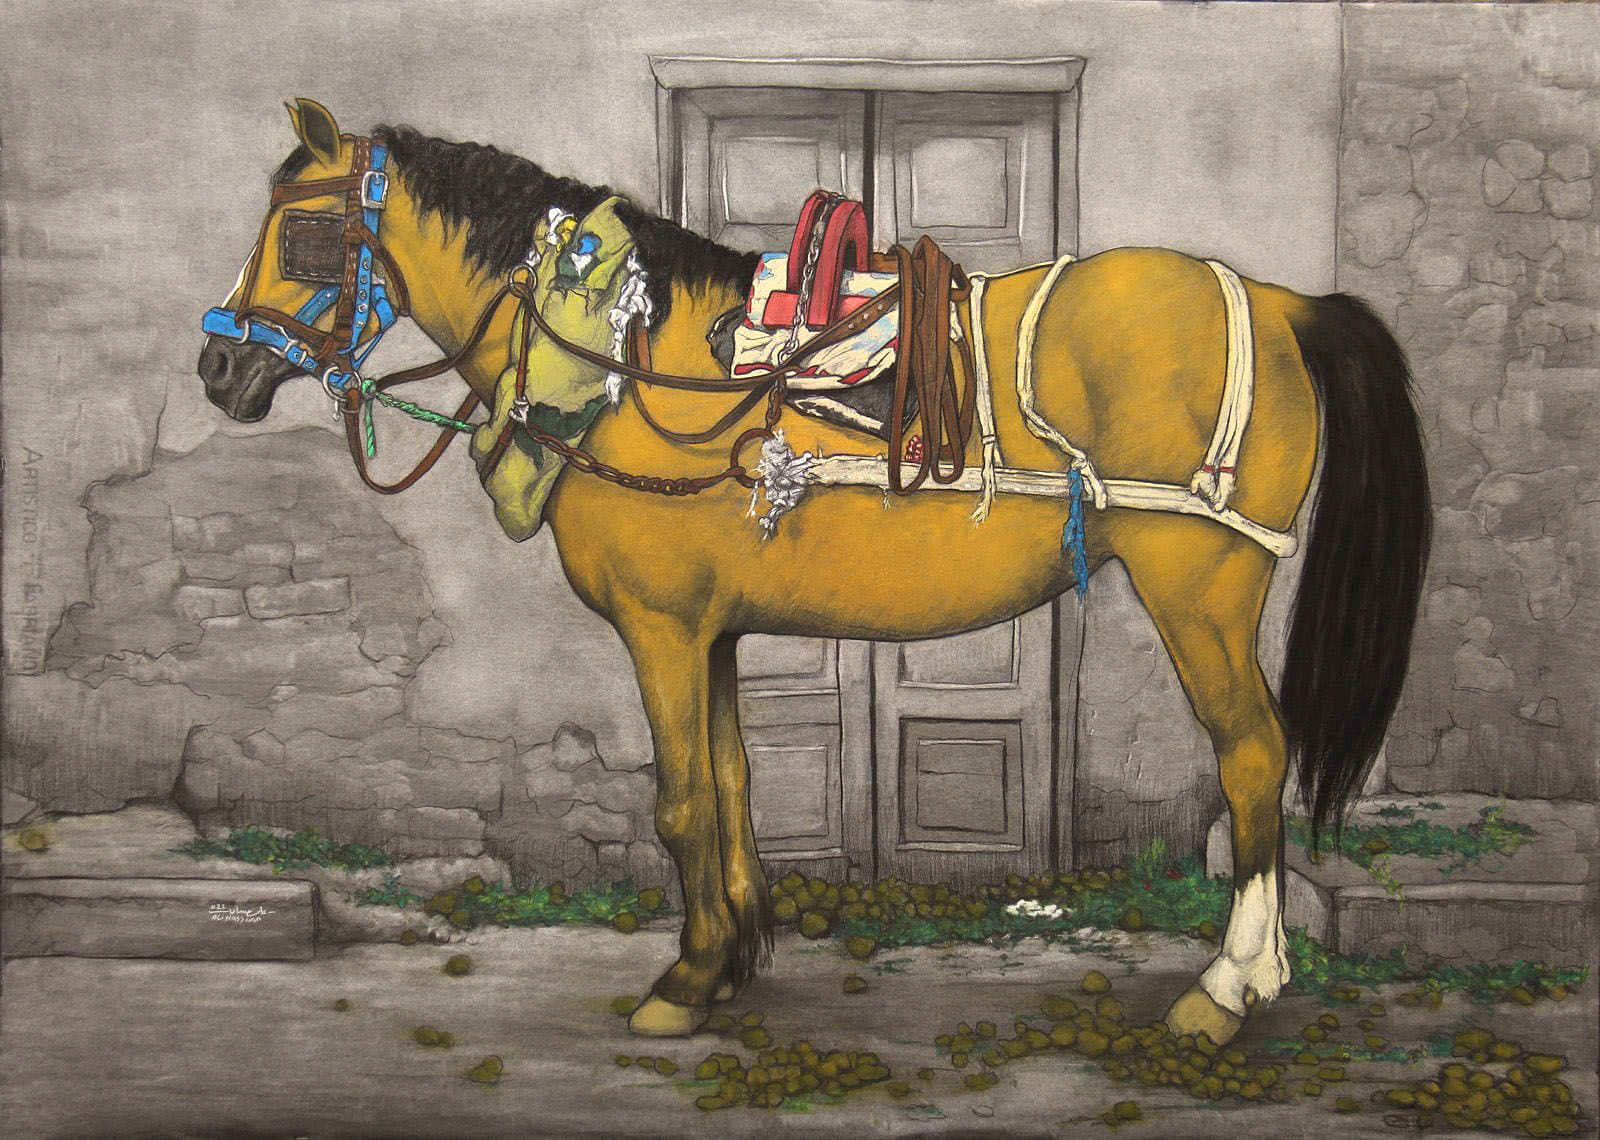 Egyptian drag horse | 2022 | Charcoal and soft pastel on paper | 90 cm x 125 cm